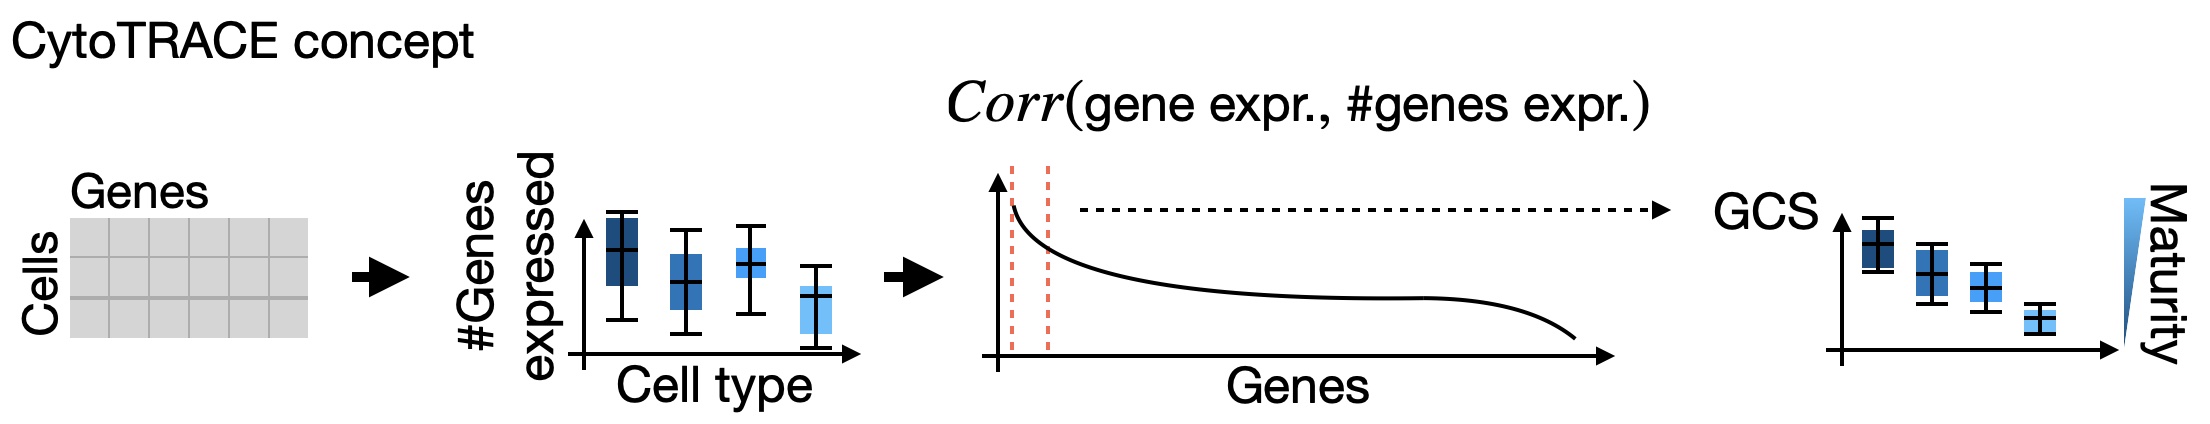 CytoTRACE uses the number of genes expressed per cell to estimate a developmental potential.